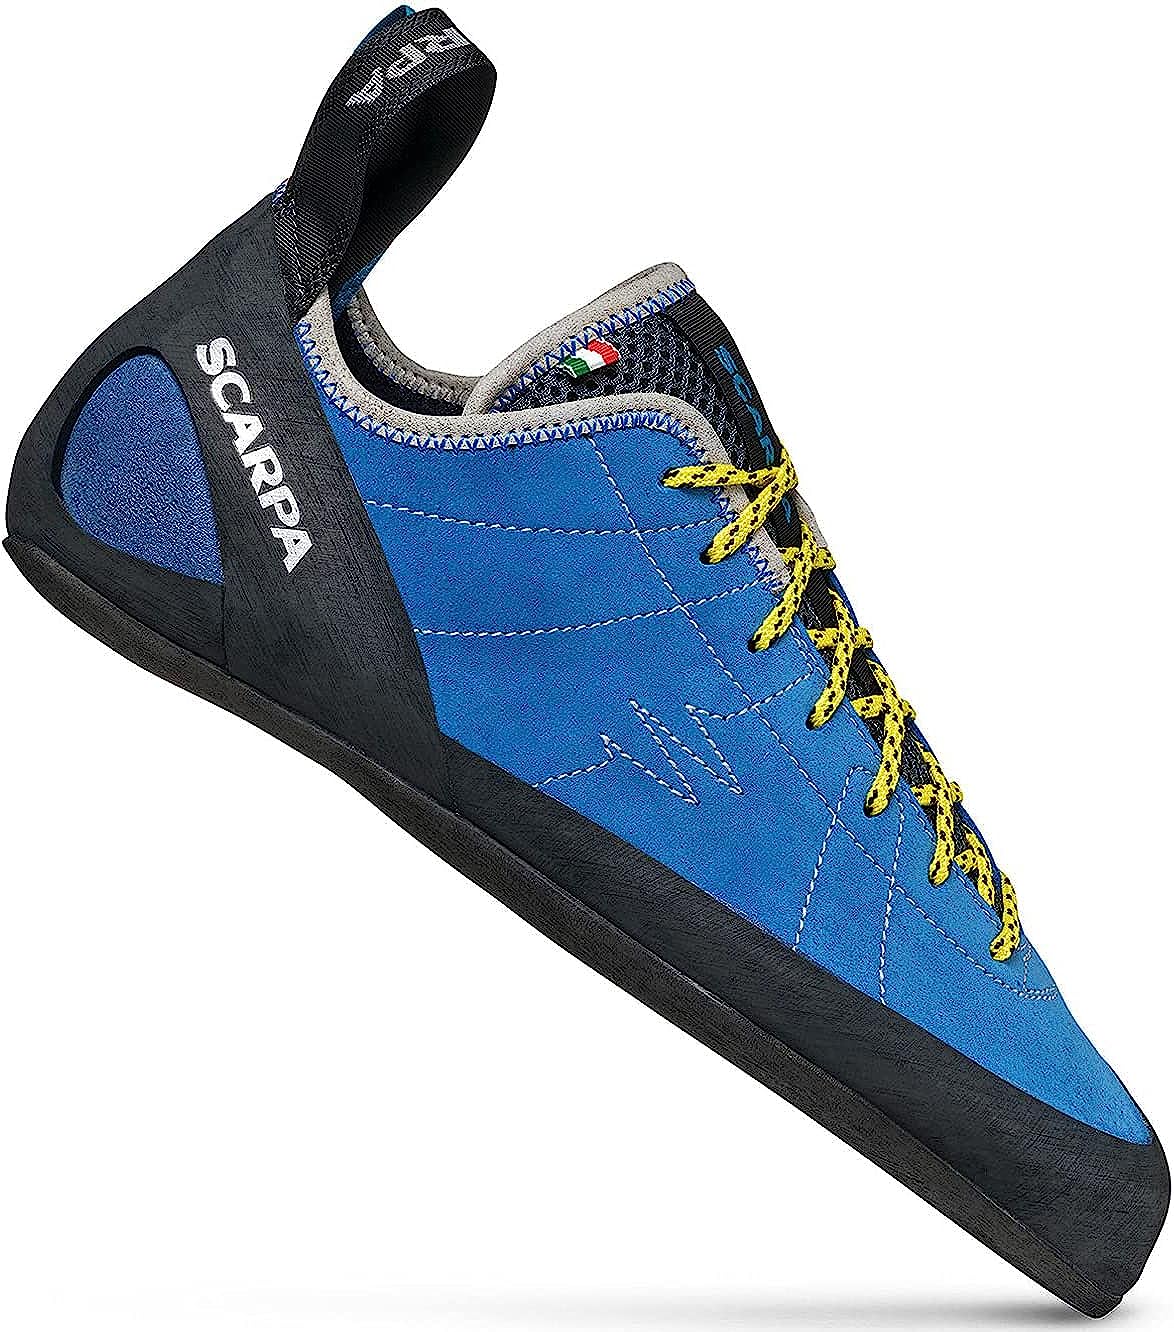 SCARPA Men's Helix Lace Rock Climbing Shoes for Trad [...]